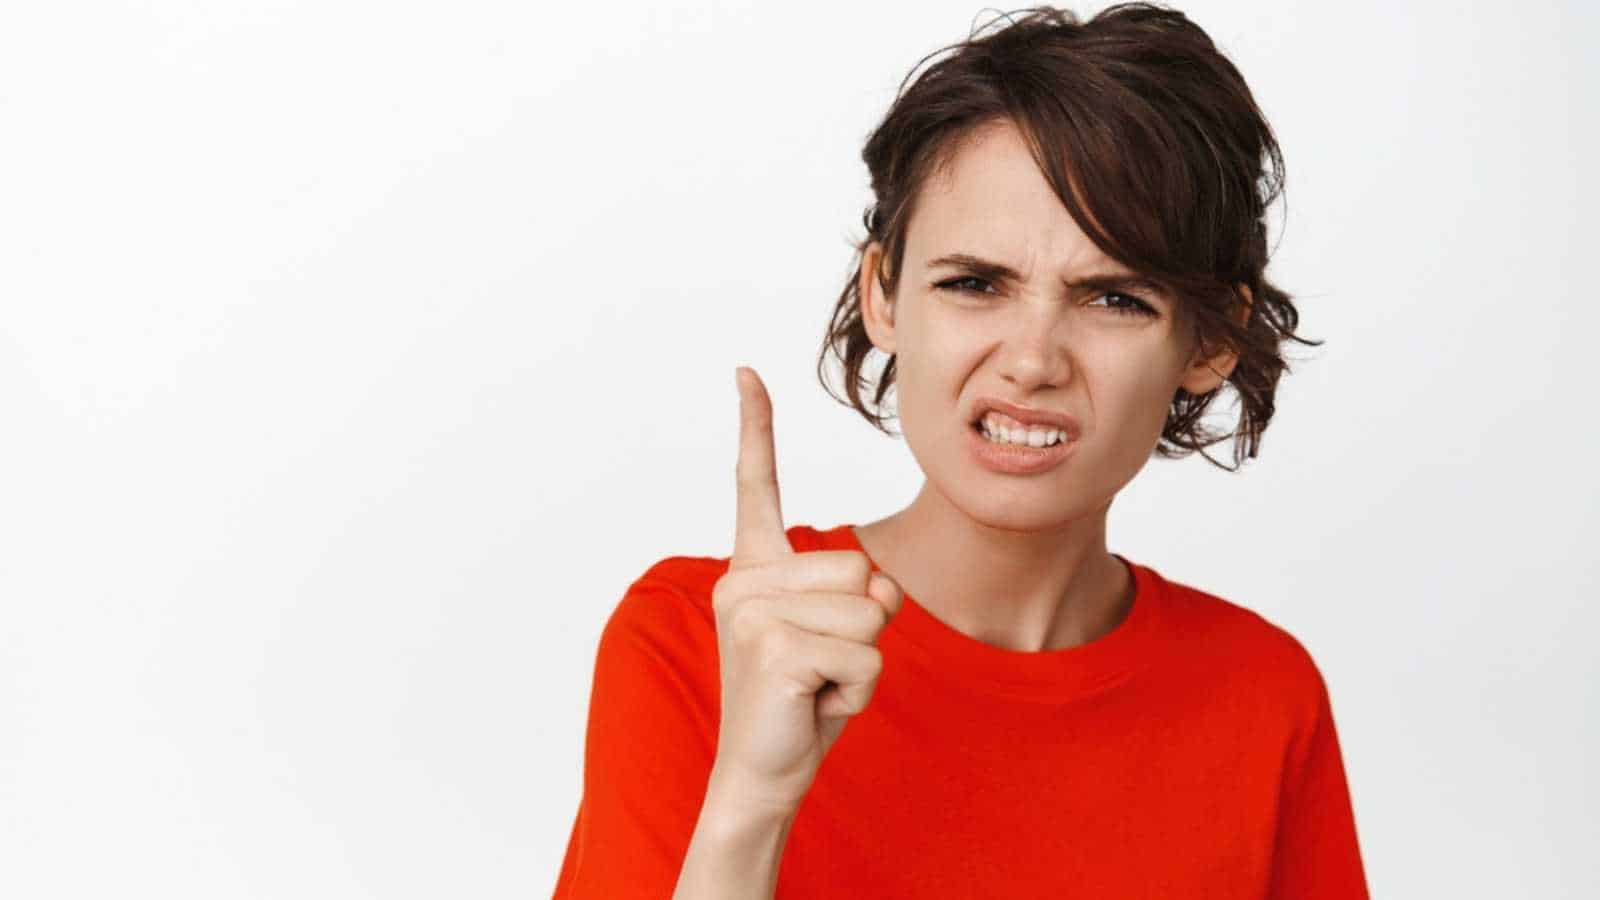 Disappointed and frustrated young woman shaking finger